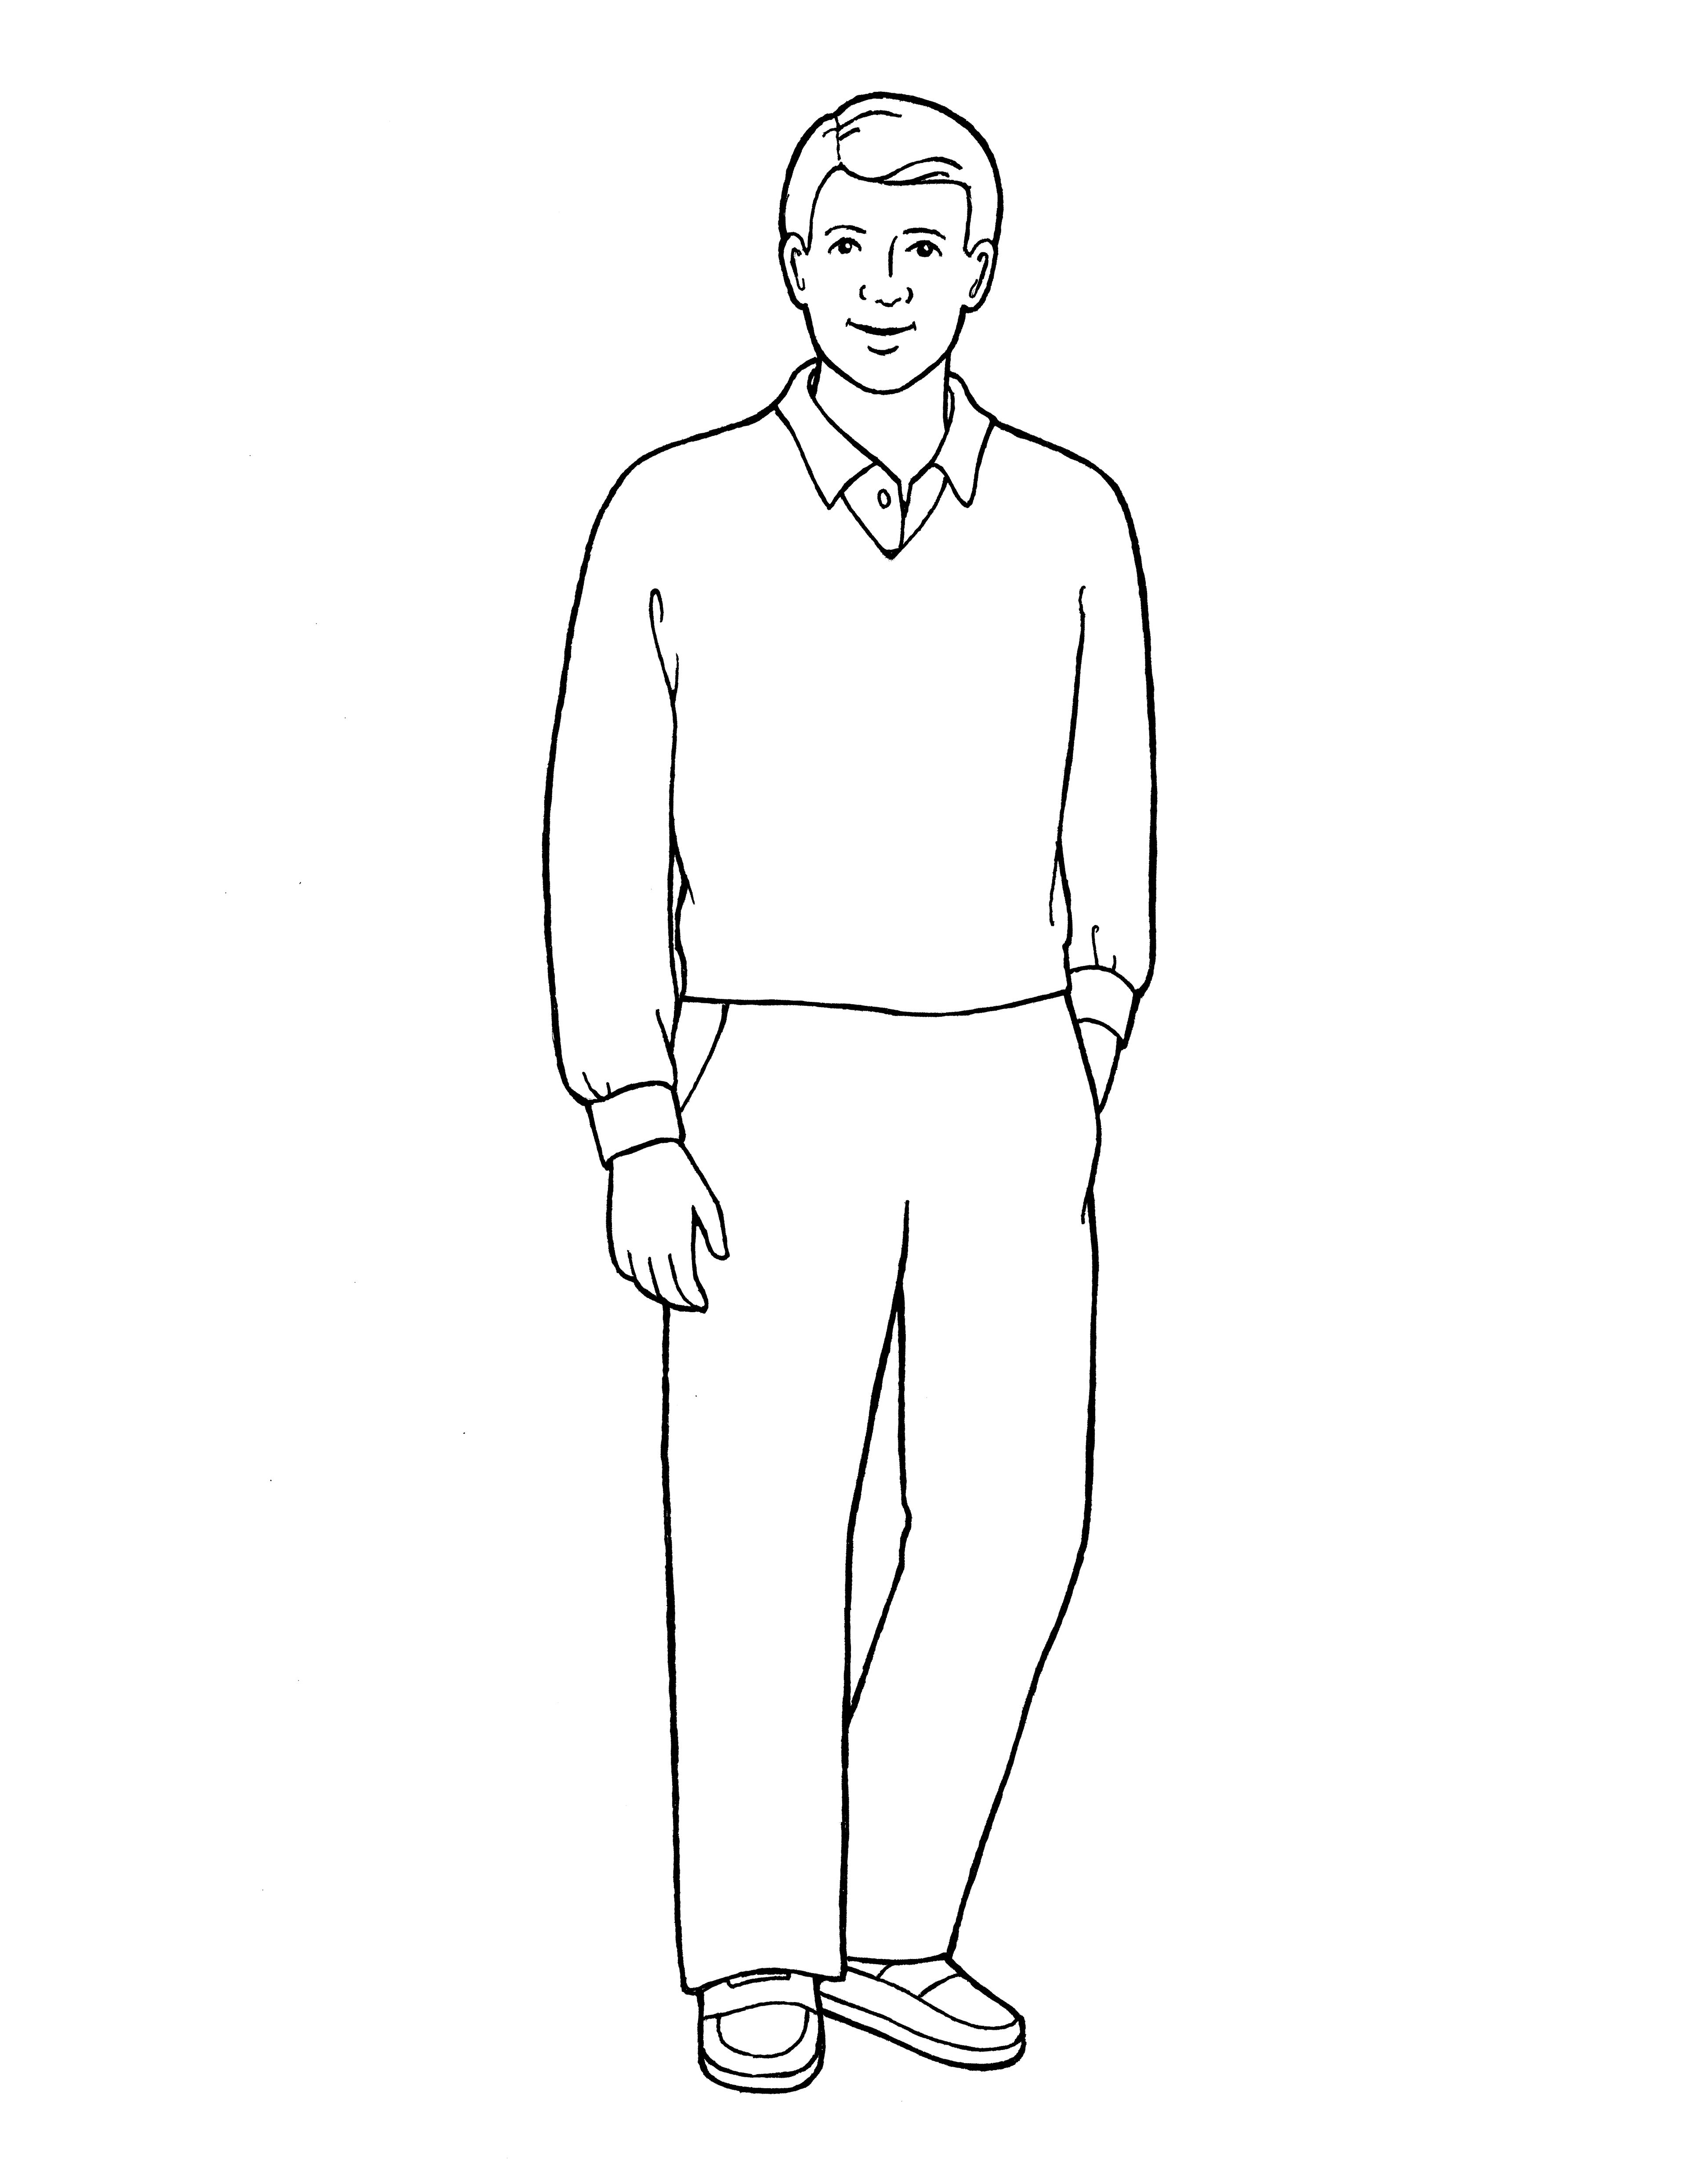 An illustration of a father from the nursery manual Behold Your Little Ones (2008), page 51.